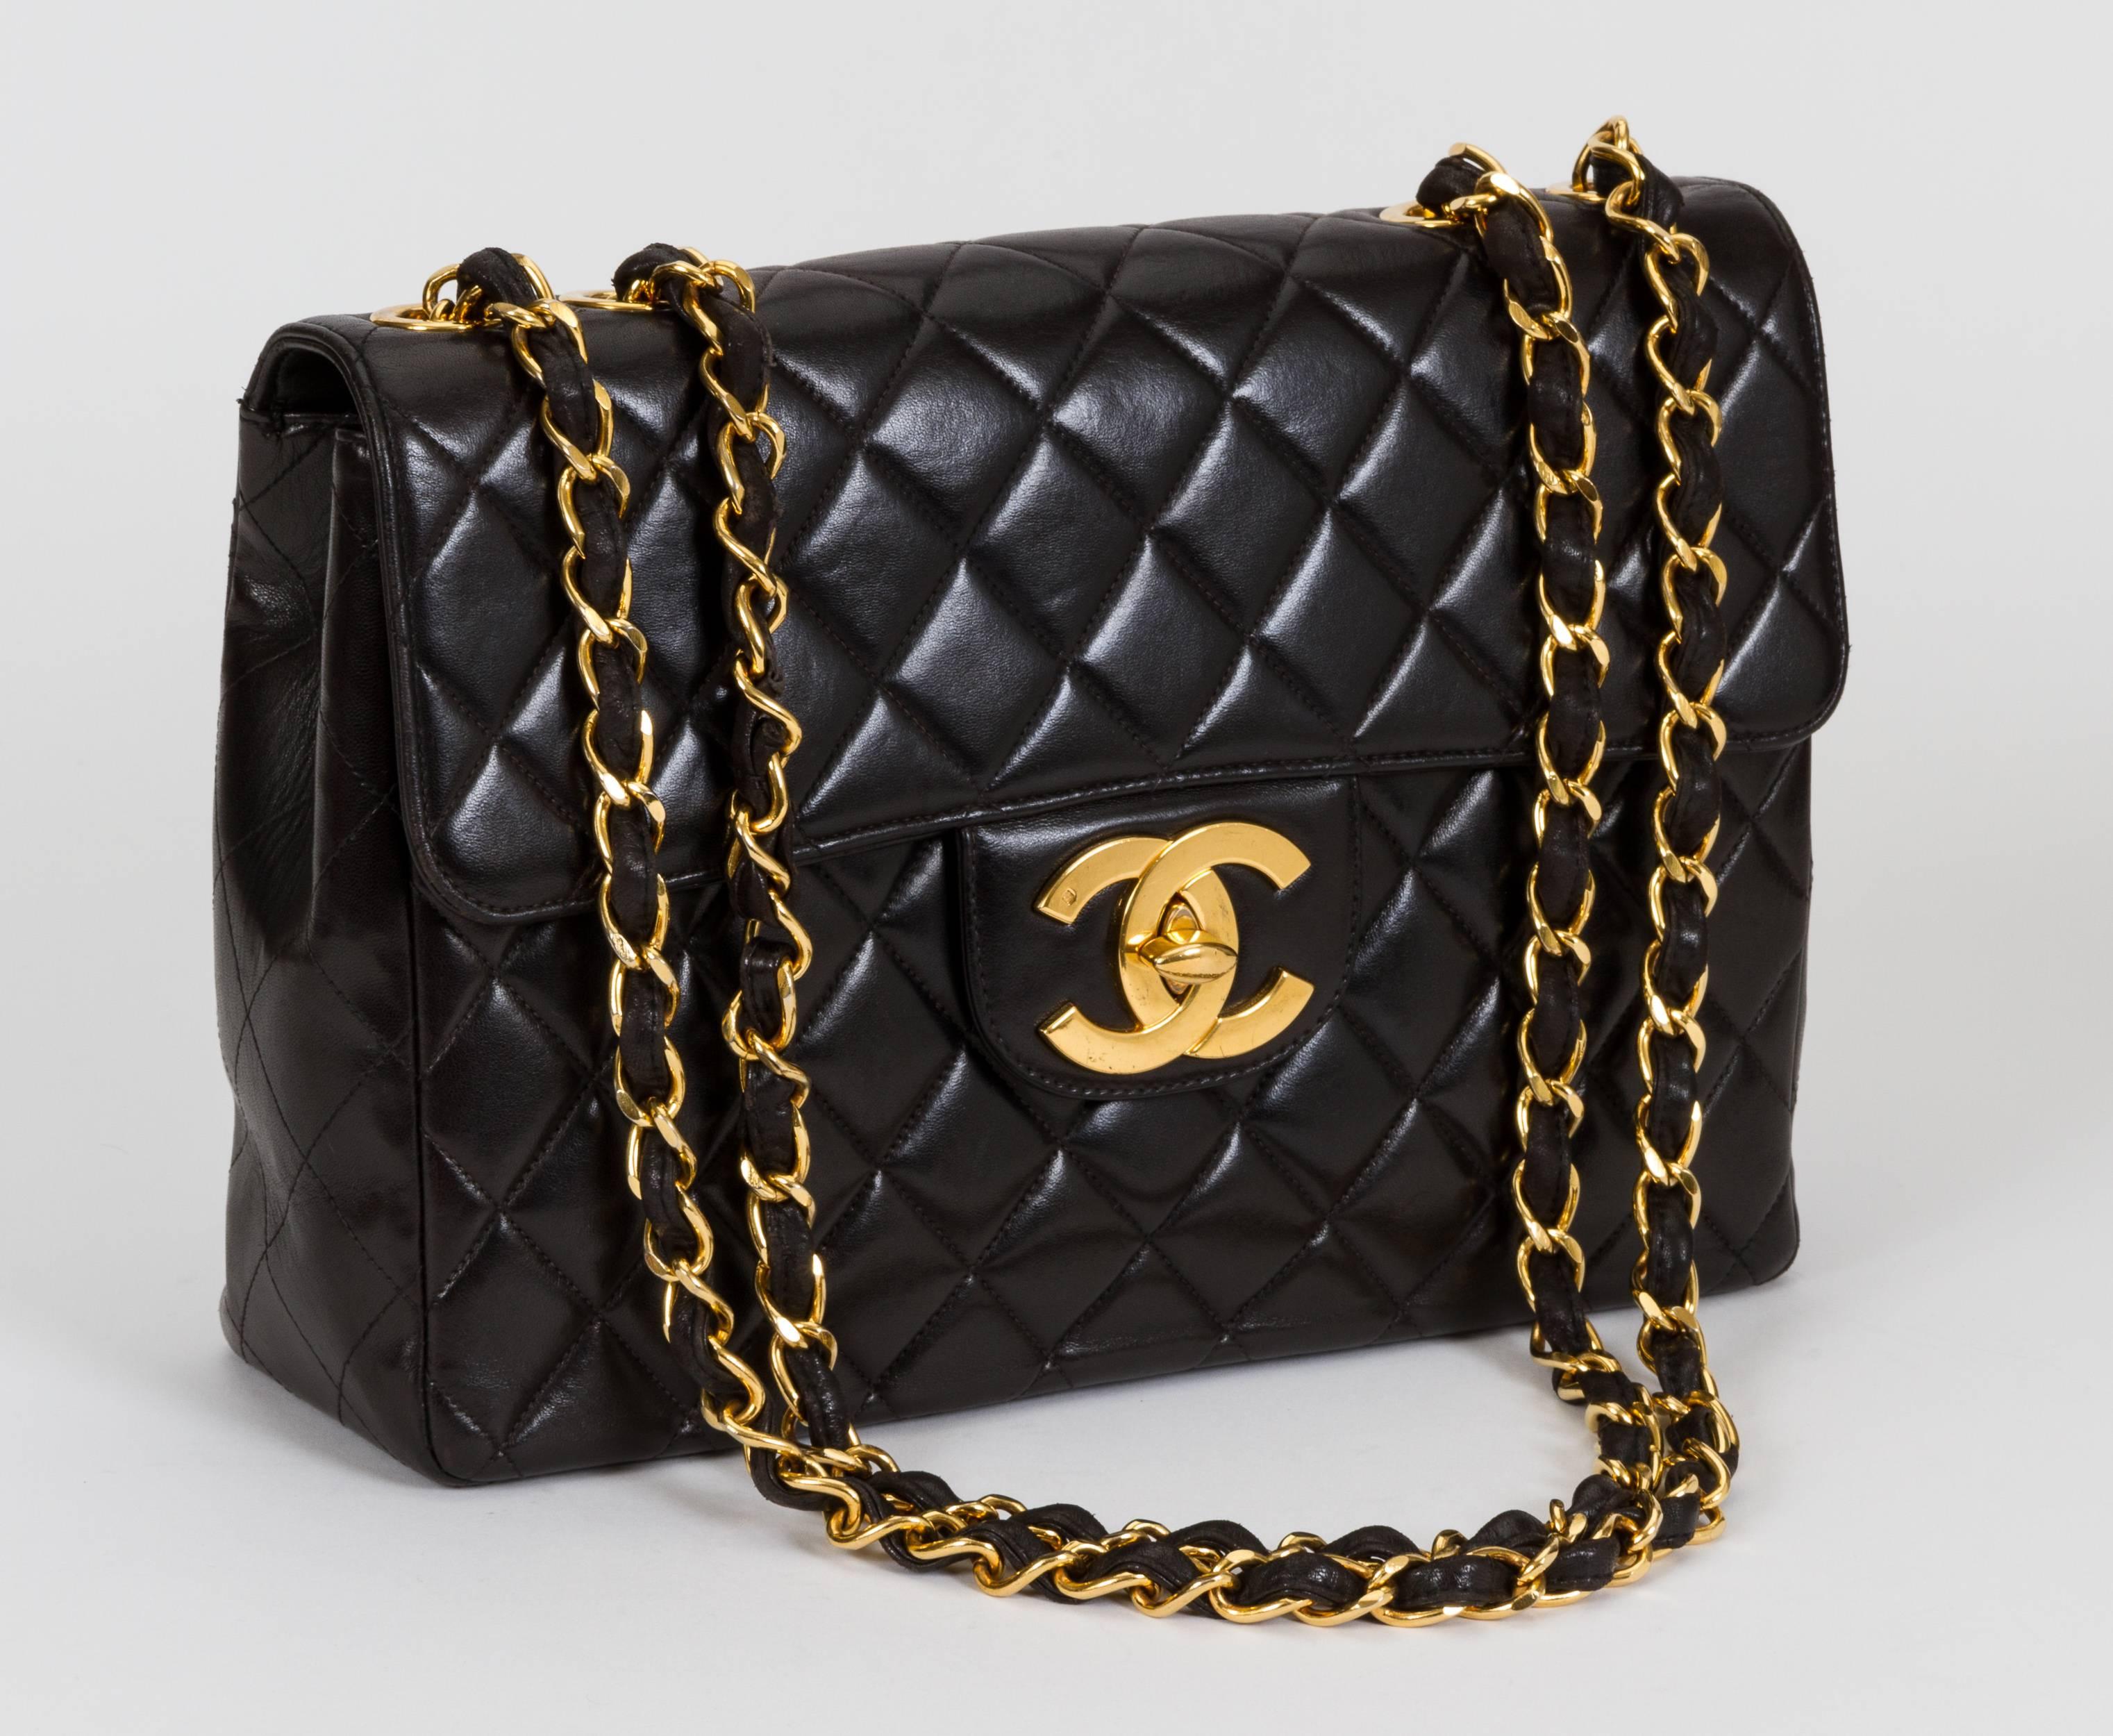 Vintage Chanel black quilted lambskin jumbo single-flap bag. Signature oversize CC logo turn-lock clap. Black leather interior. Very good condition. Can be worn with strap long, 25